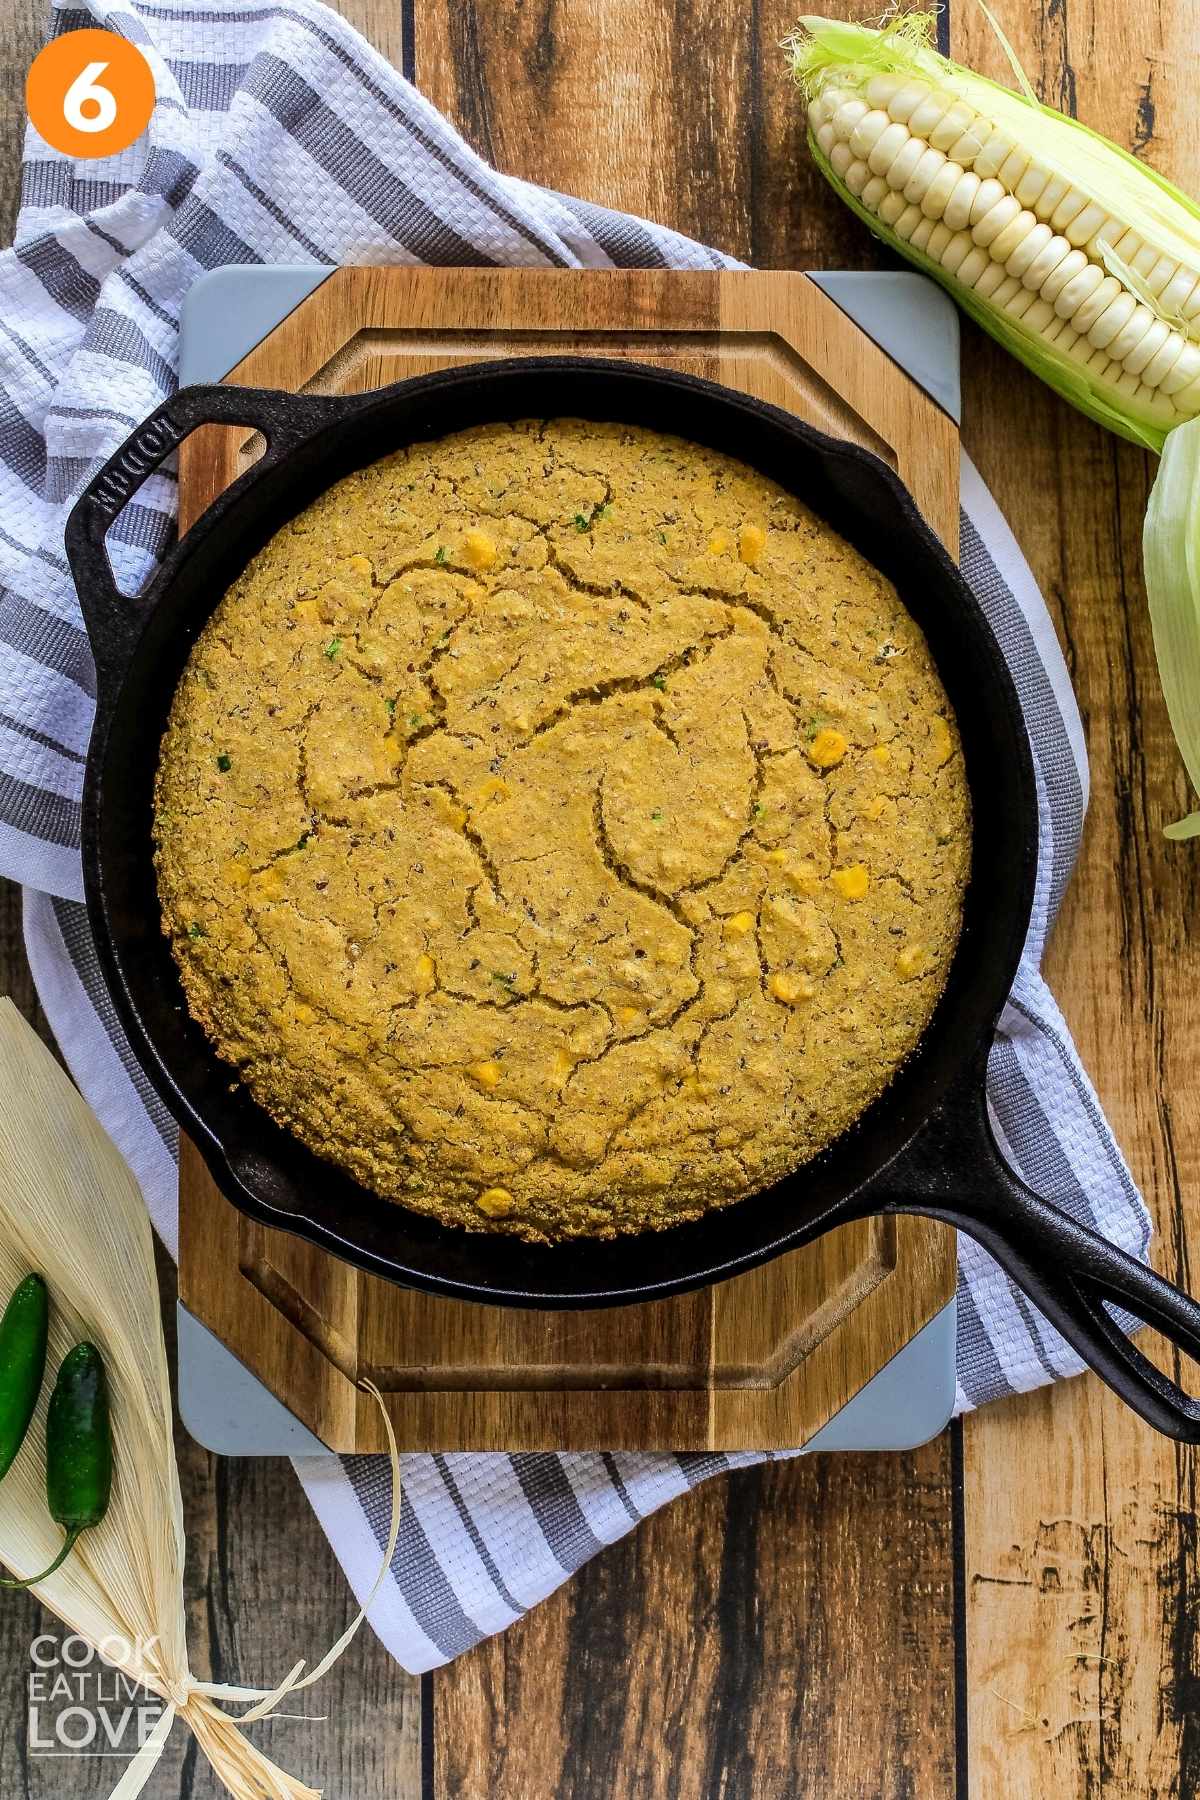 Baked vegan cornbread in a skillet on the table.